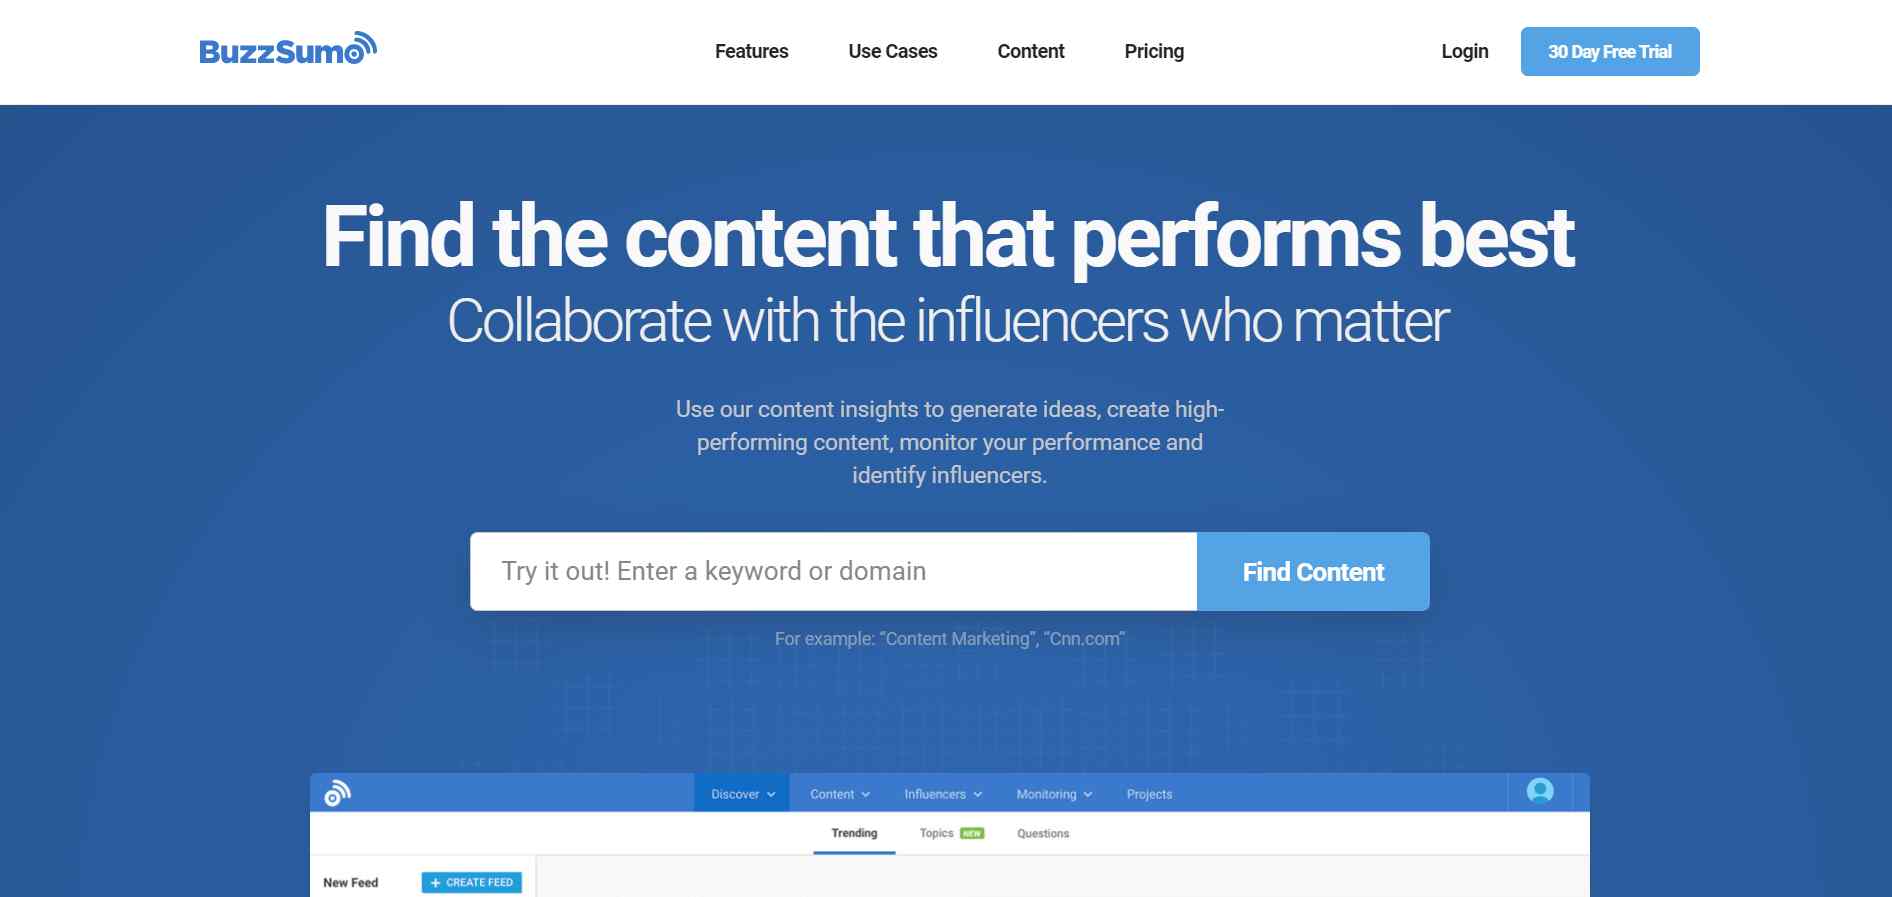 BuzzSumo is another top industry leader it's help product marketers for product development